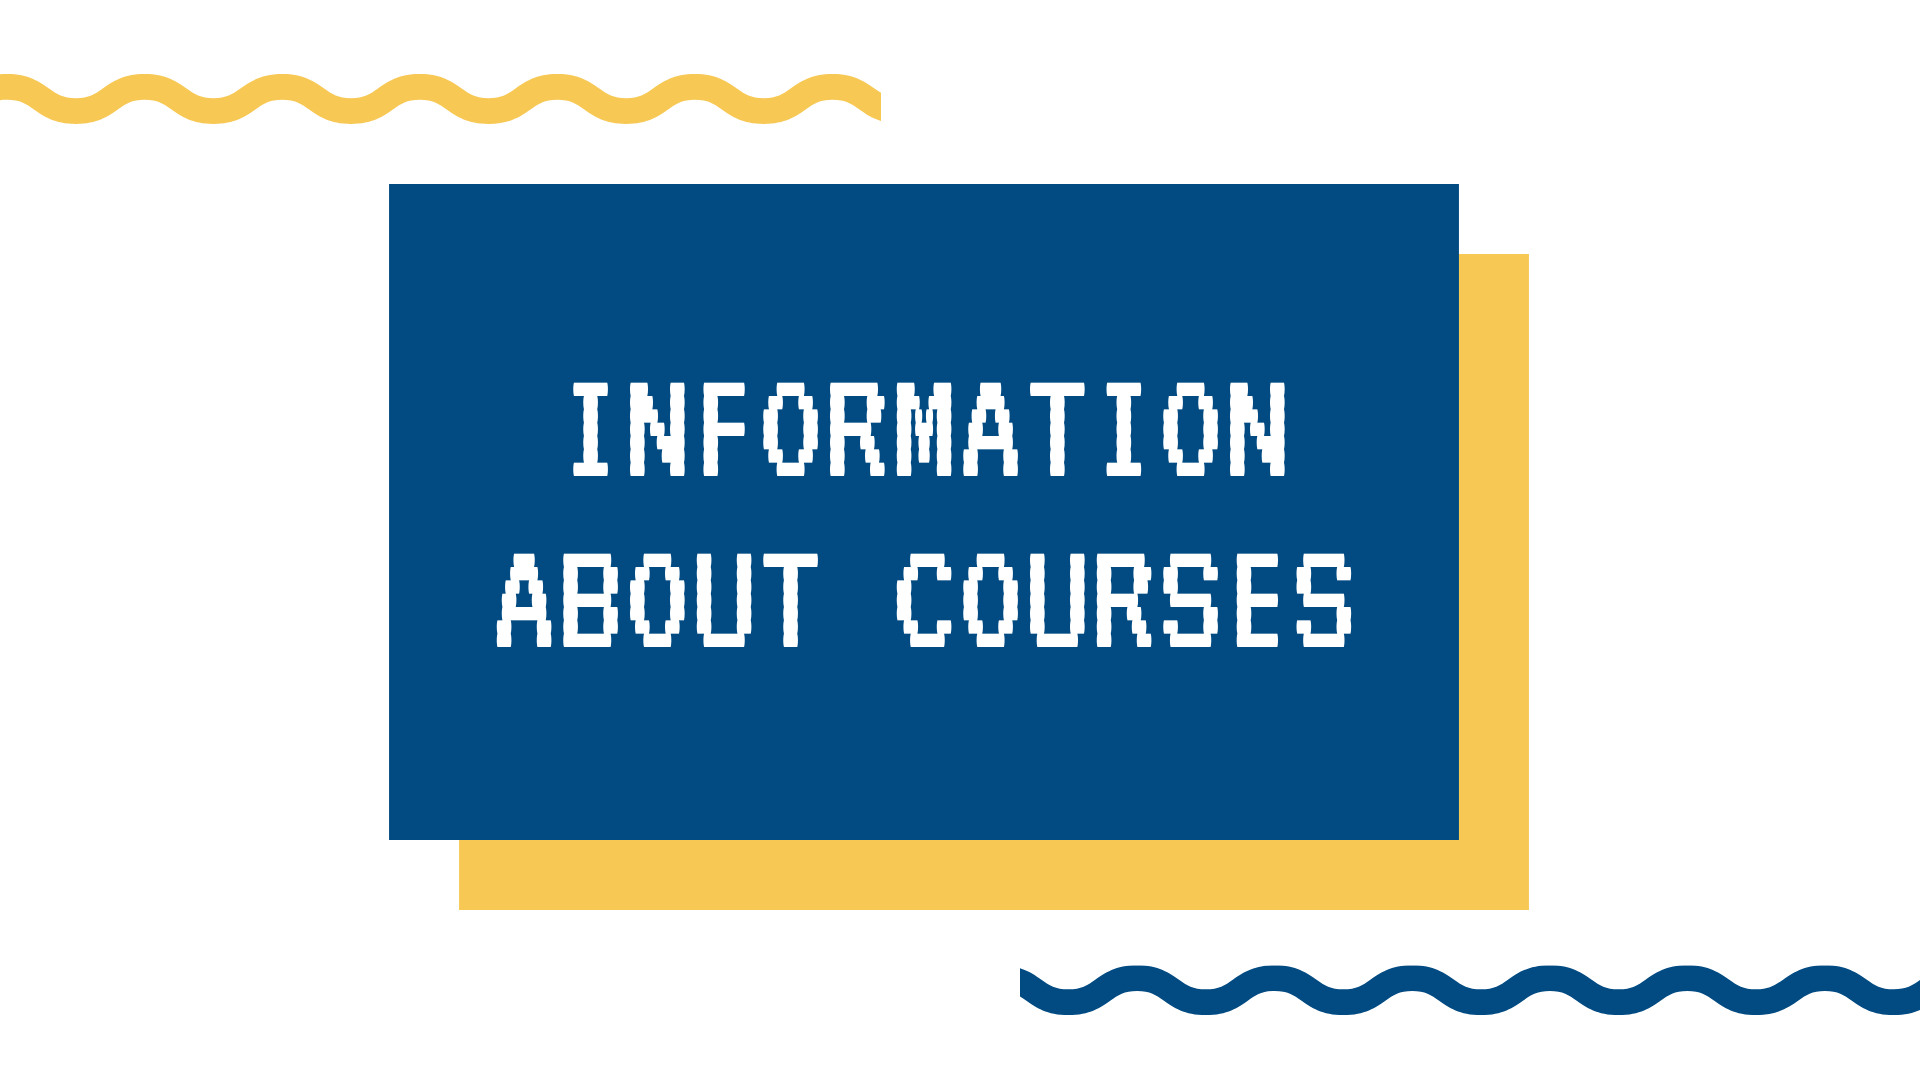 Information about courses